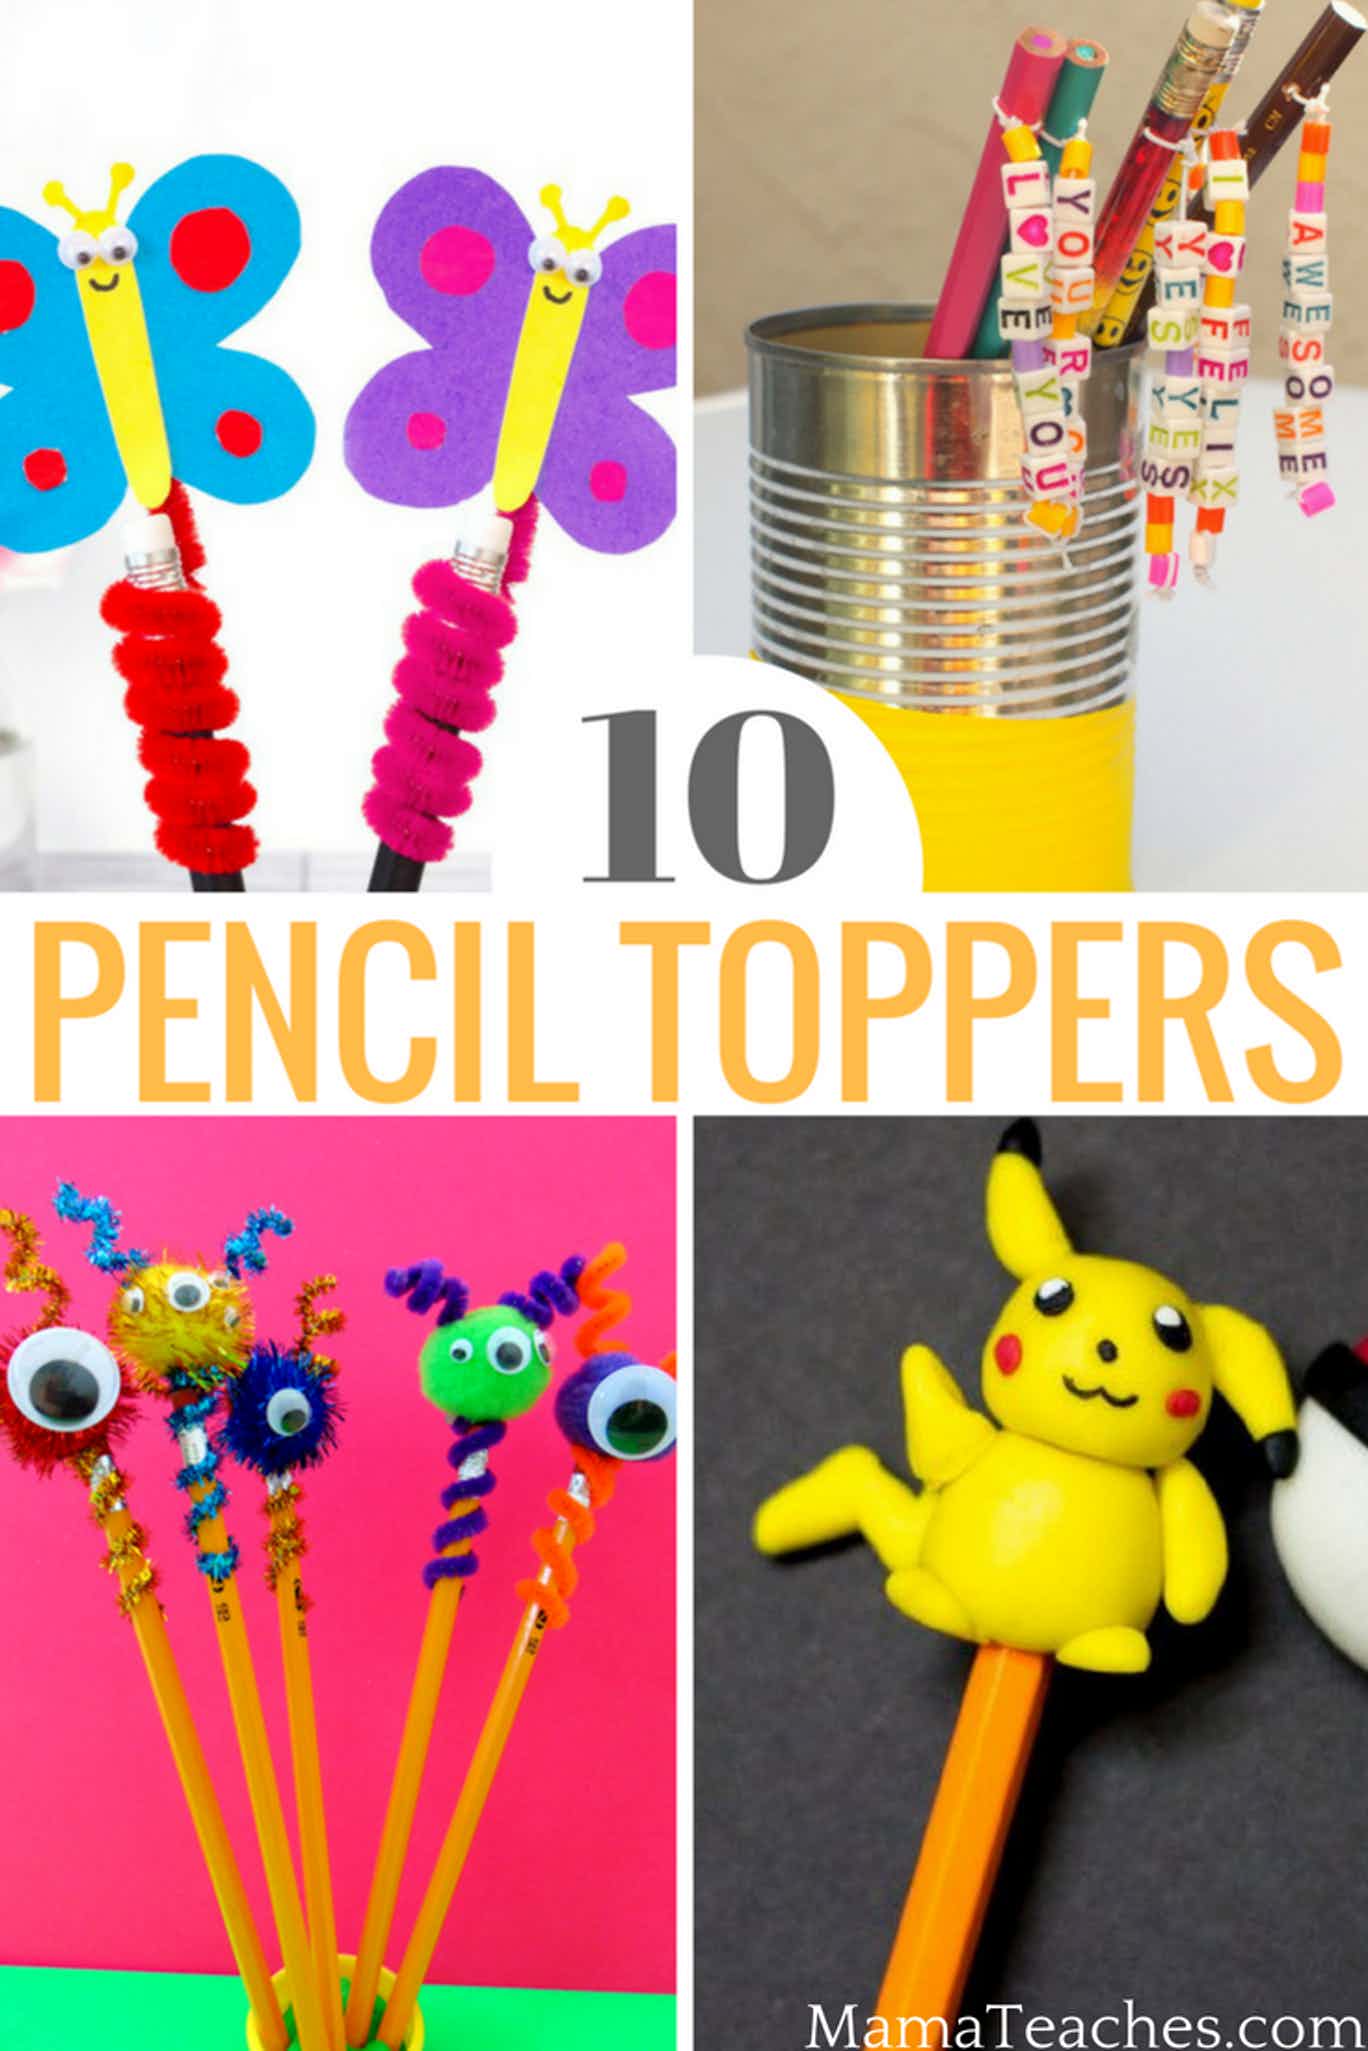 10 Pencil Topper Crafts for Kids